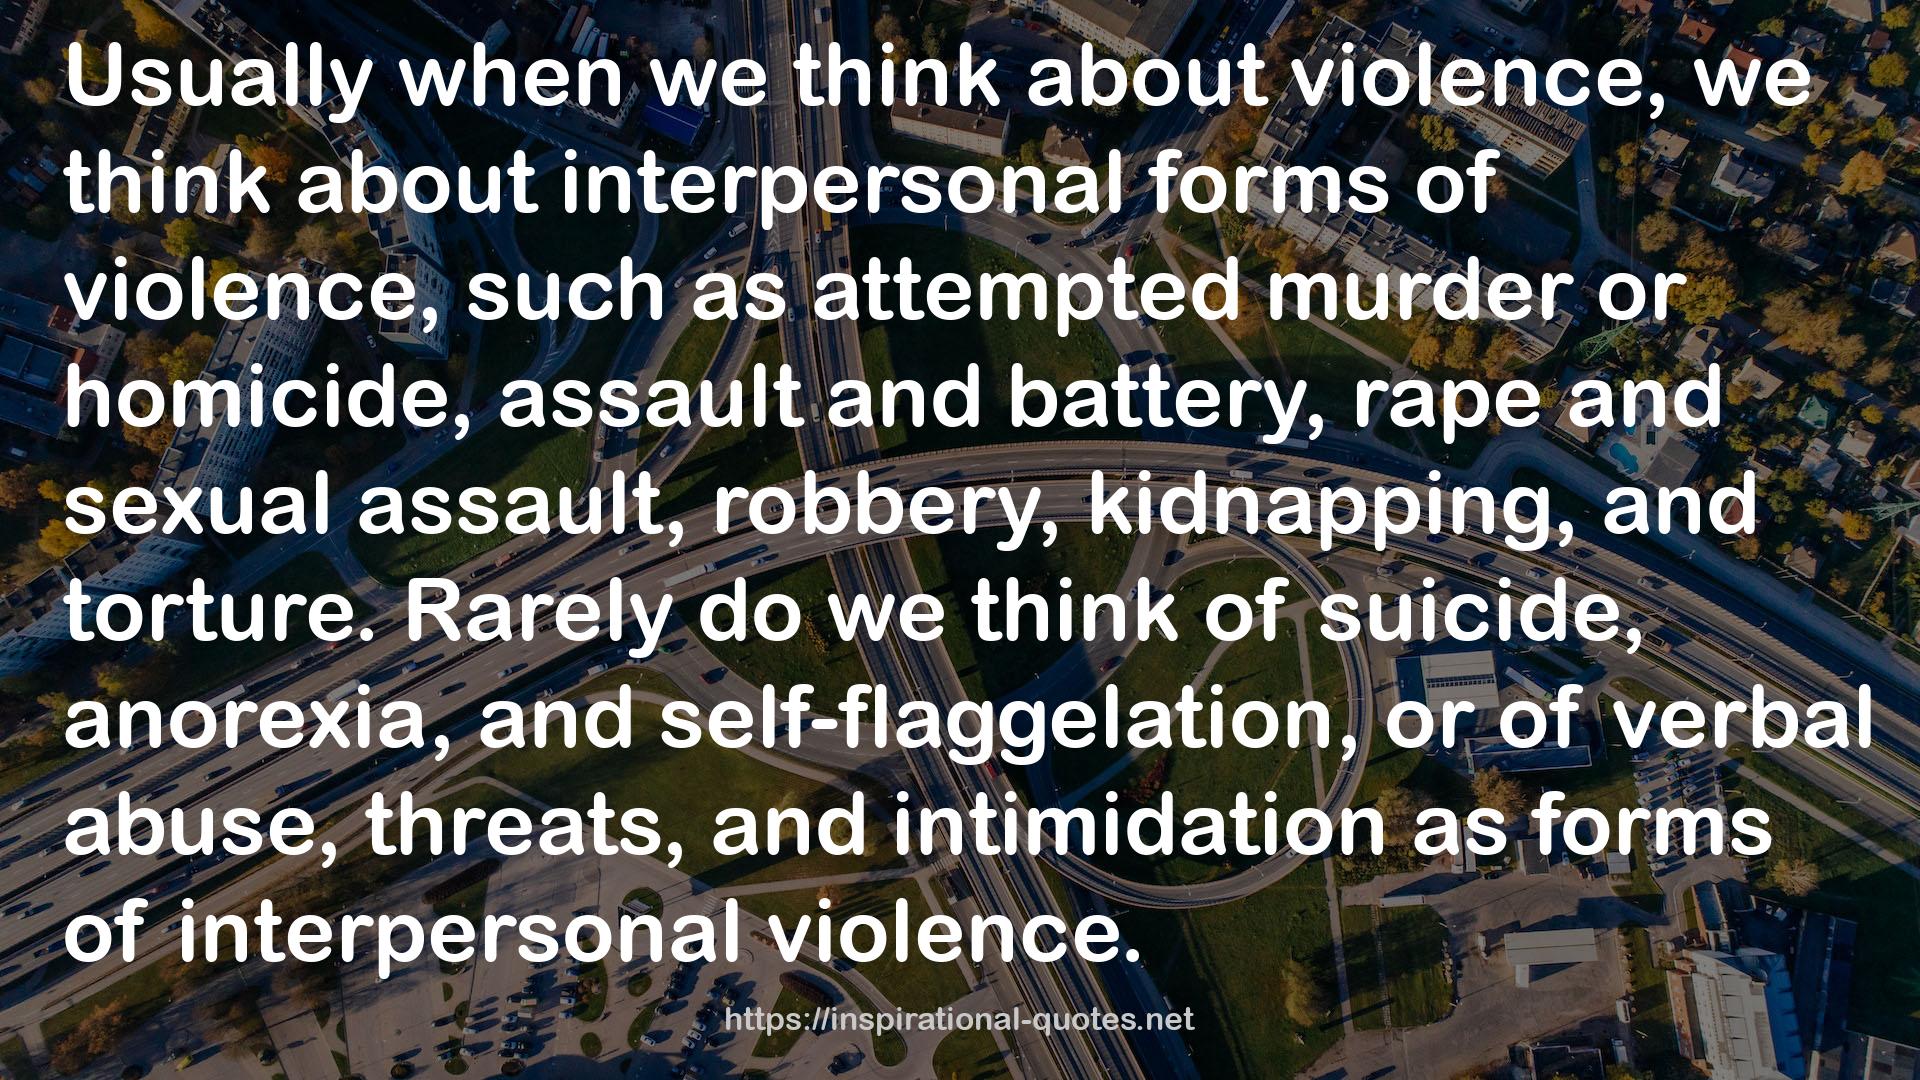 Violence and Nonviolence: Pathways to Understanding QUOTES